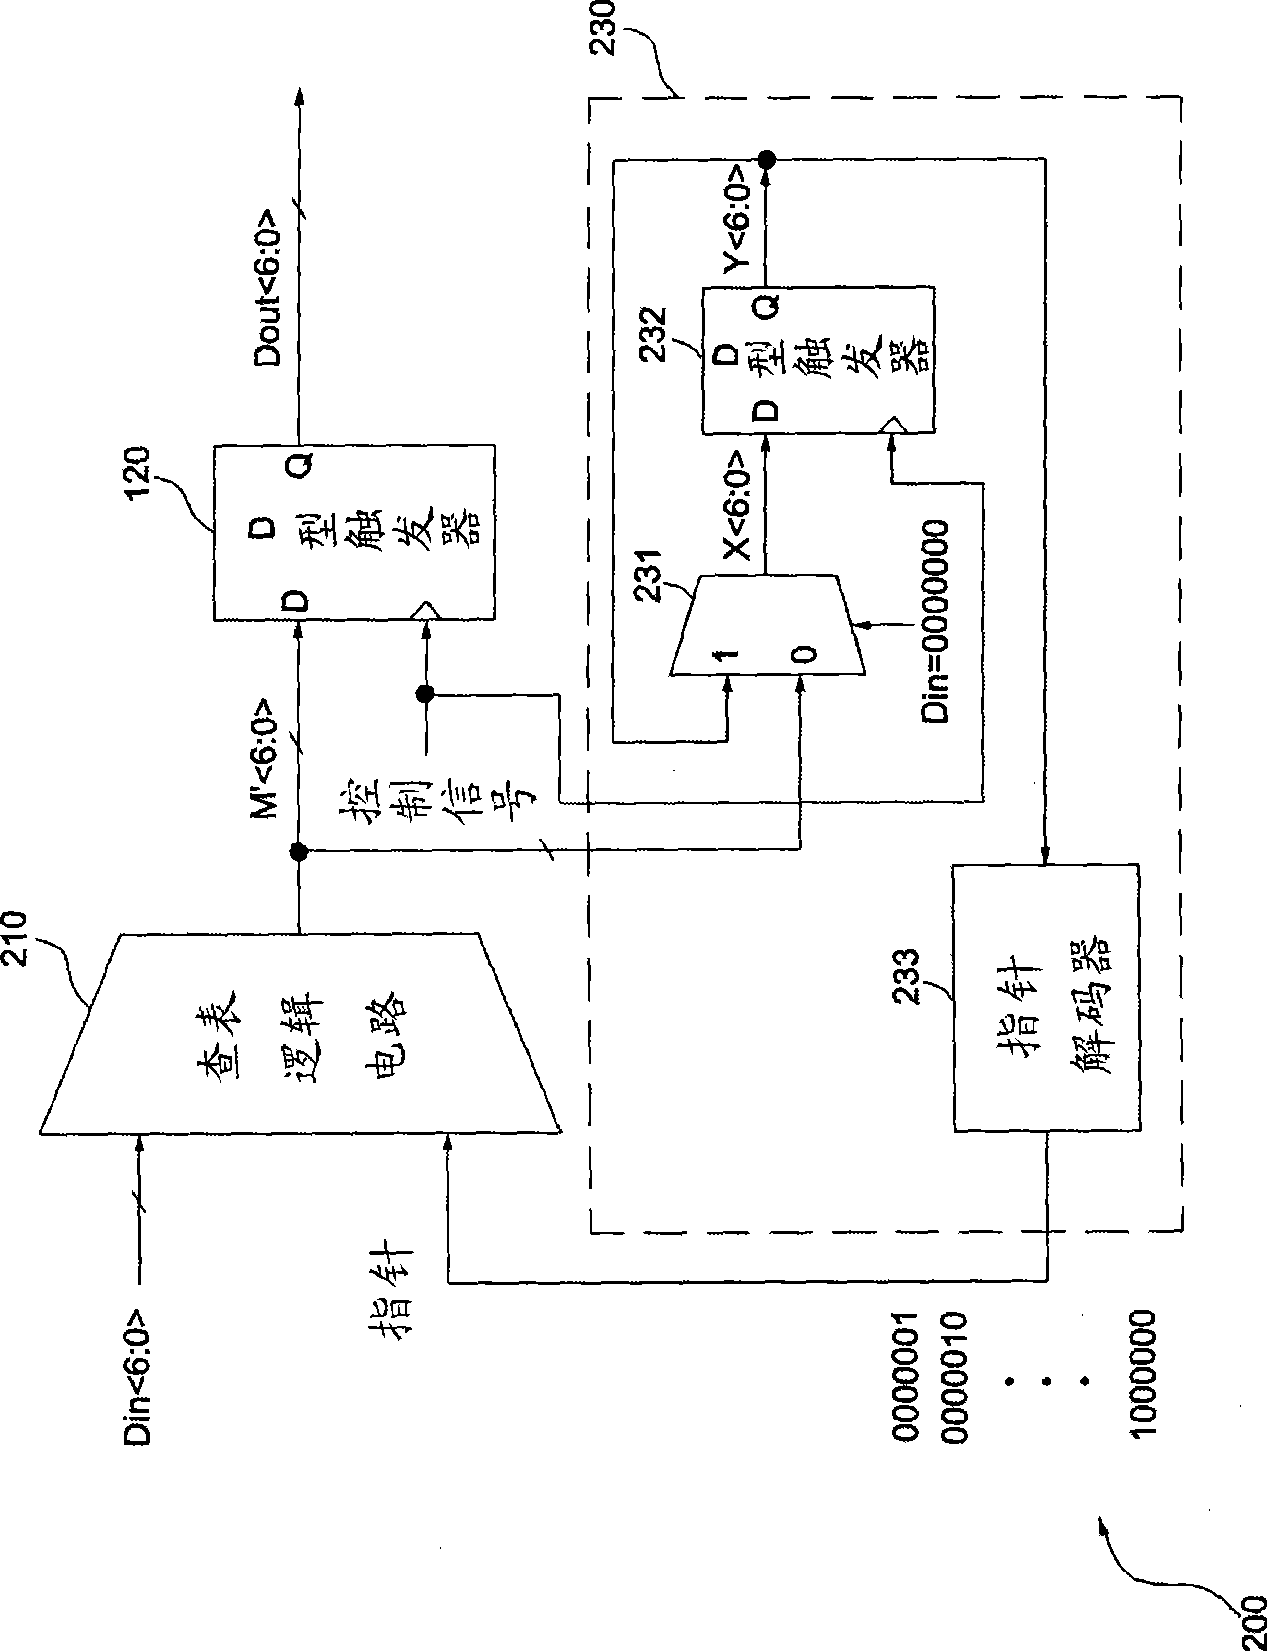 Table-look-up type data weighting balance circuit and dynamic component matching method